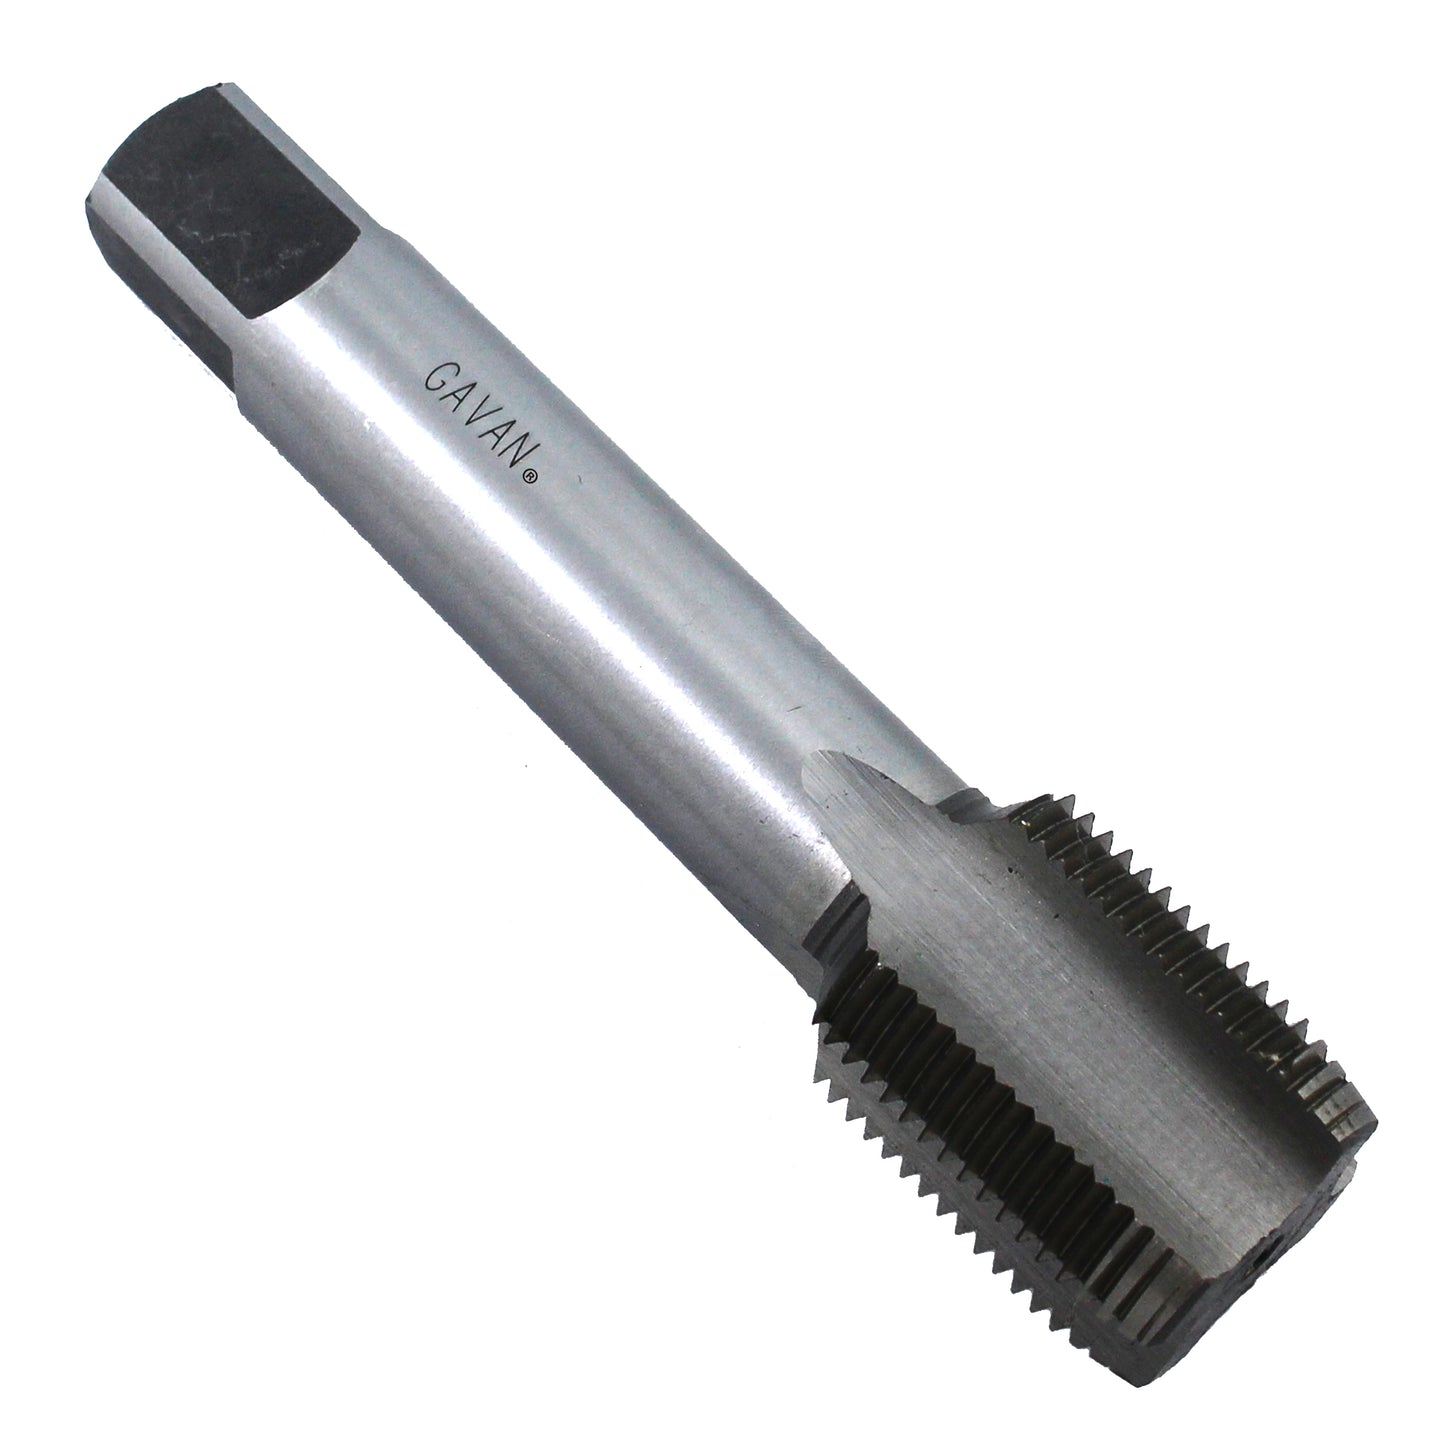 1 3/4" - 16 HSS Unified Right Hand Thread Tap